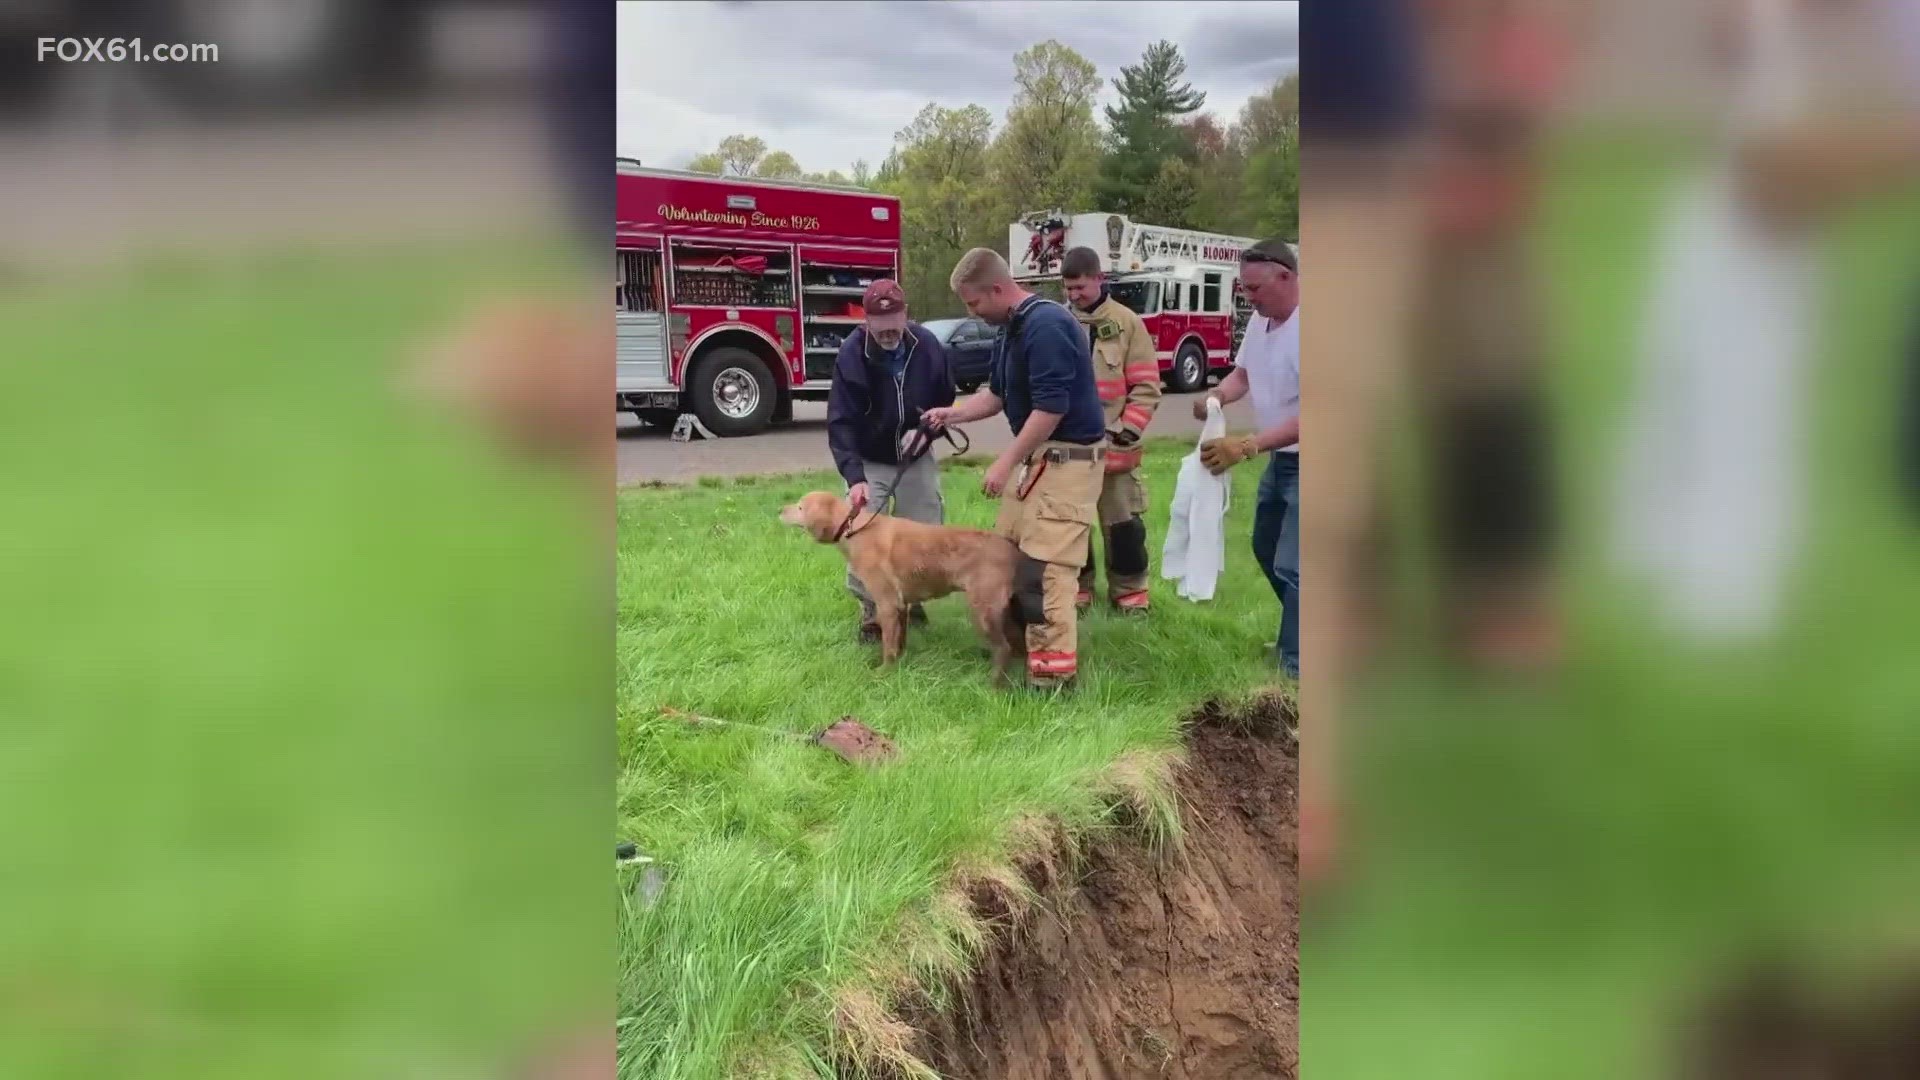 The Bloomfield Center Fire Department posted the story of their rescue efforts on their Facebook page, along with photos of the dog in safe hands.